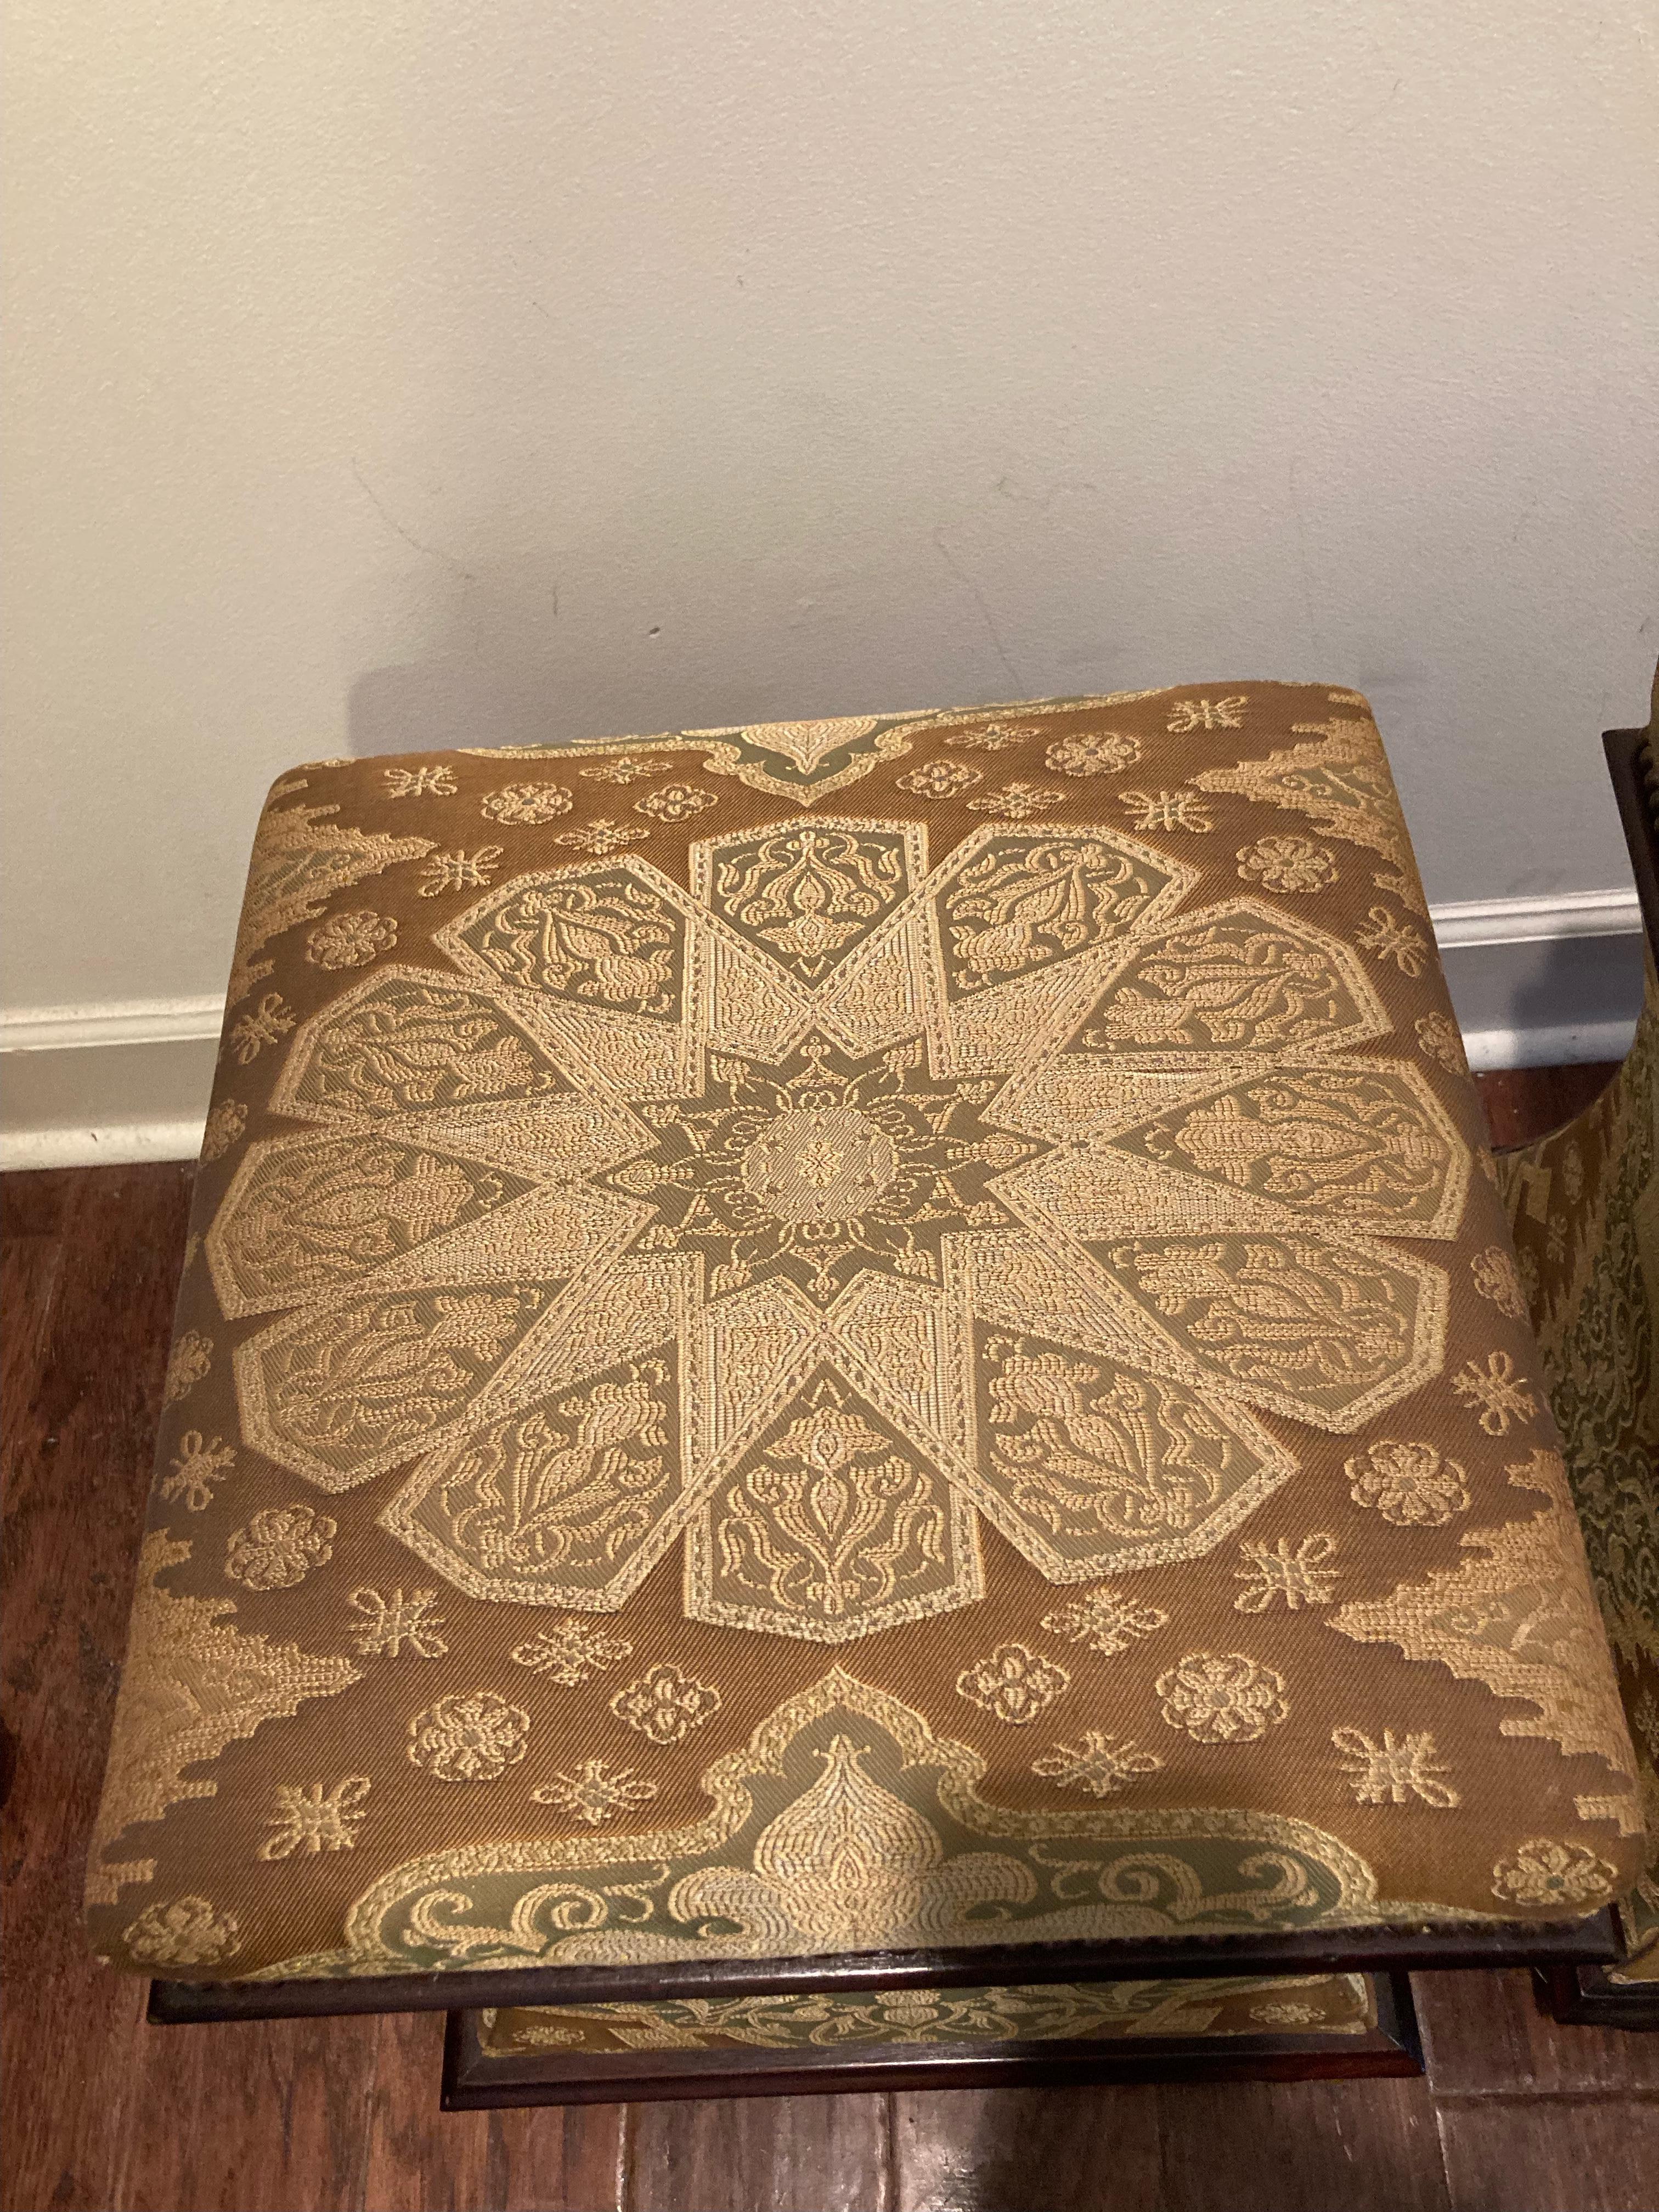 Bellville storage ottomans by George Smith upholstered in neutral tapestry fabric, finished with brass nailheads and sitting on mahogany bun feet. Tops open to reveal storage.
NOTE: Will sell individually.